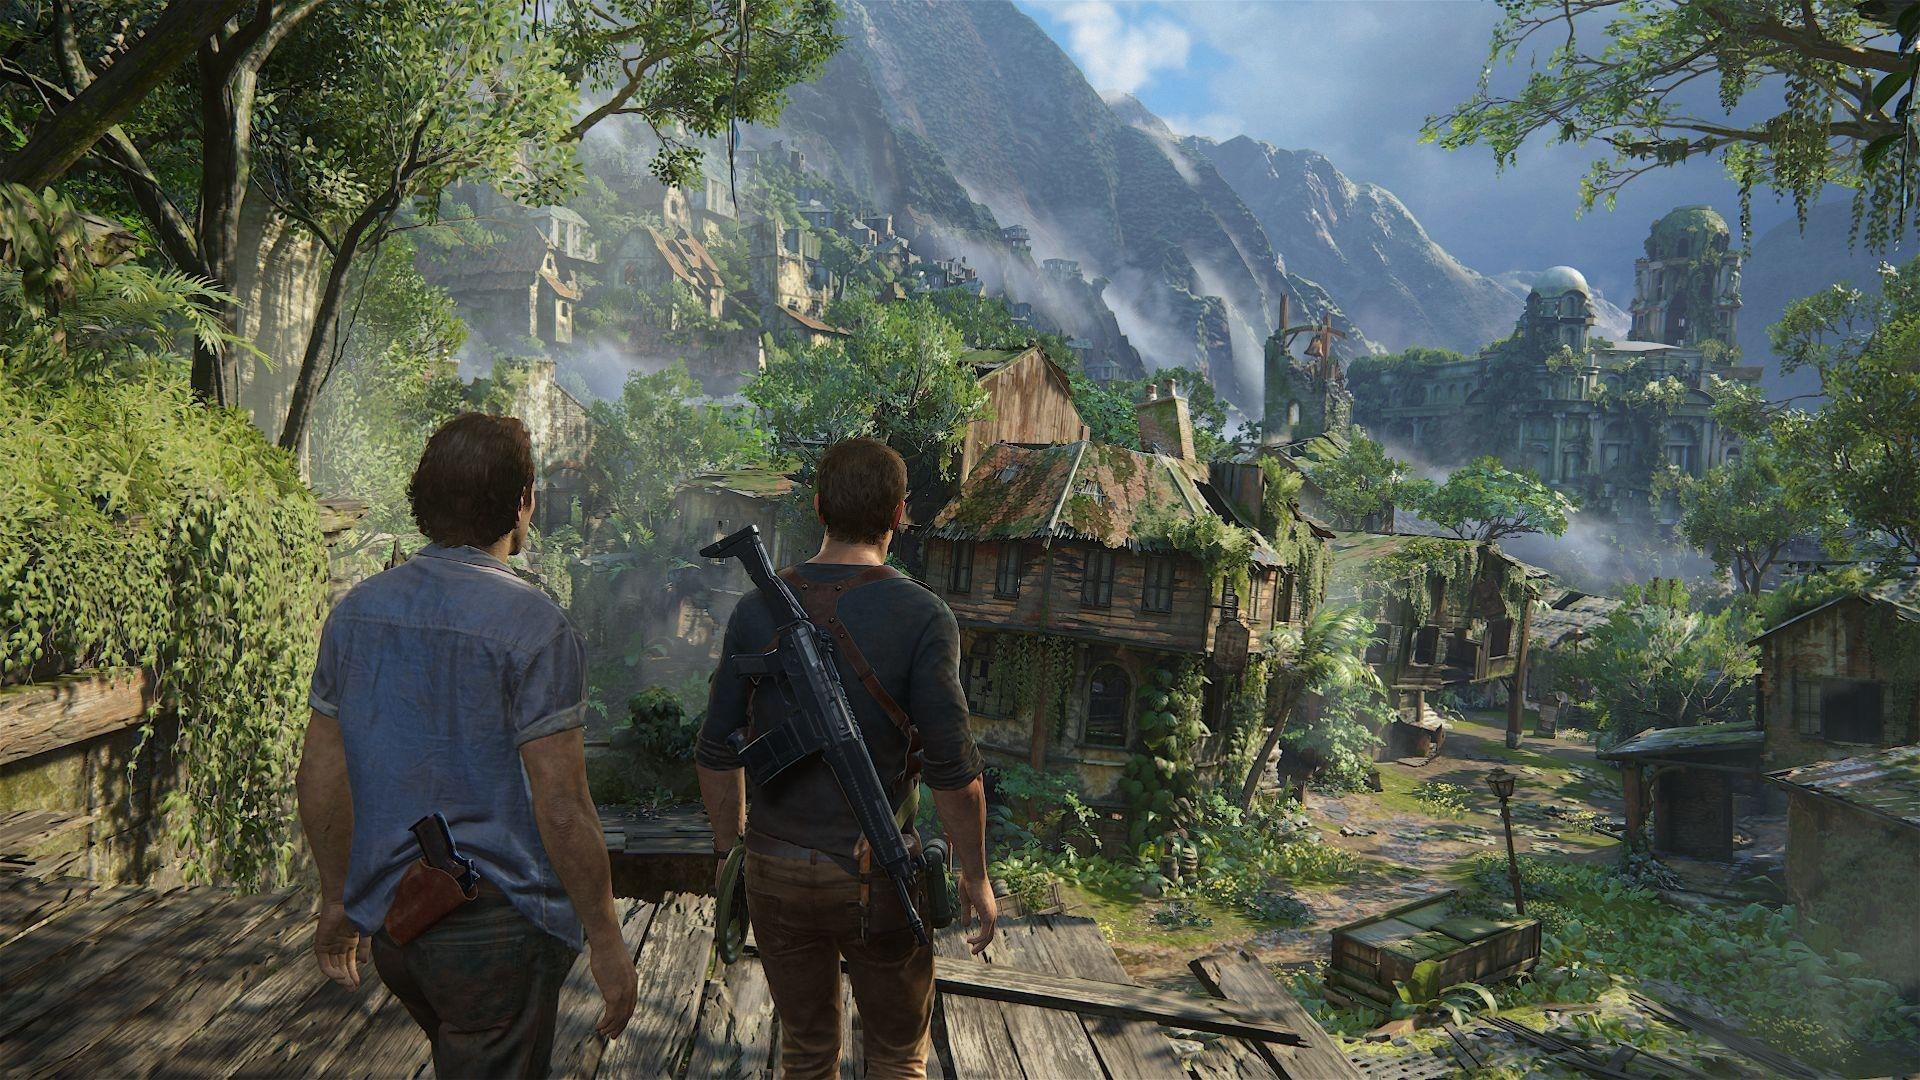 Image for Desktop: uncharted 4 a thiefs end. likeagod